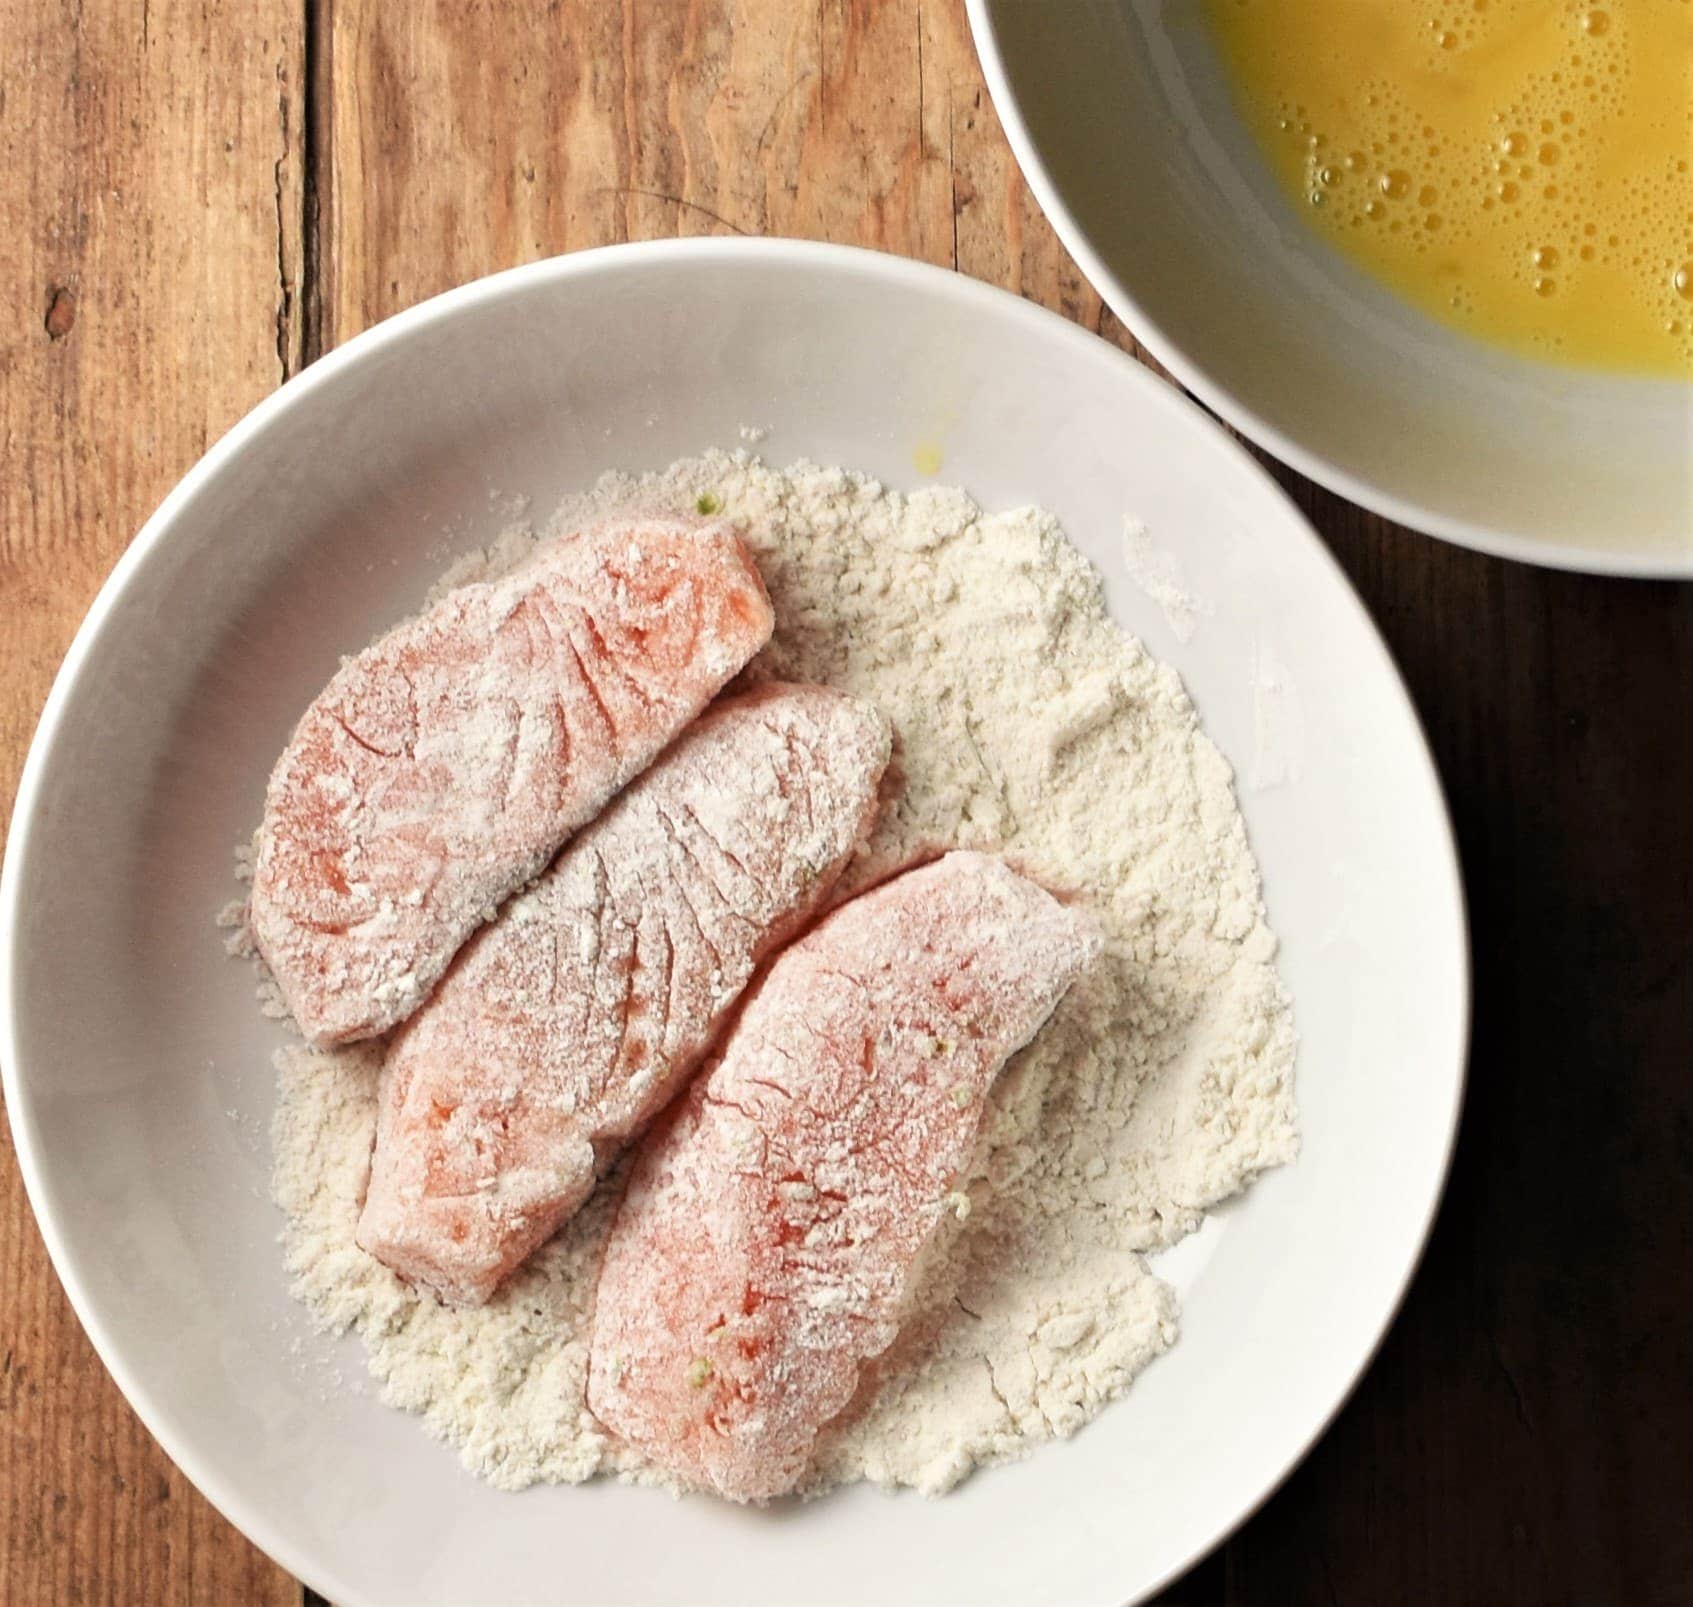 Salmon pieces coated in flour in white bowl with egg wash in background.